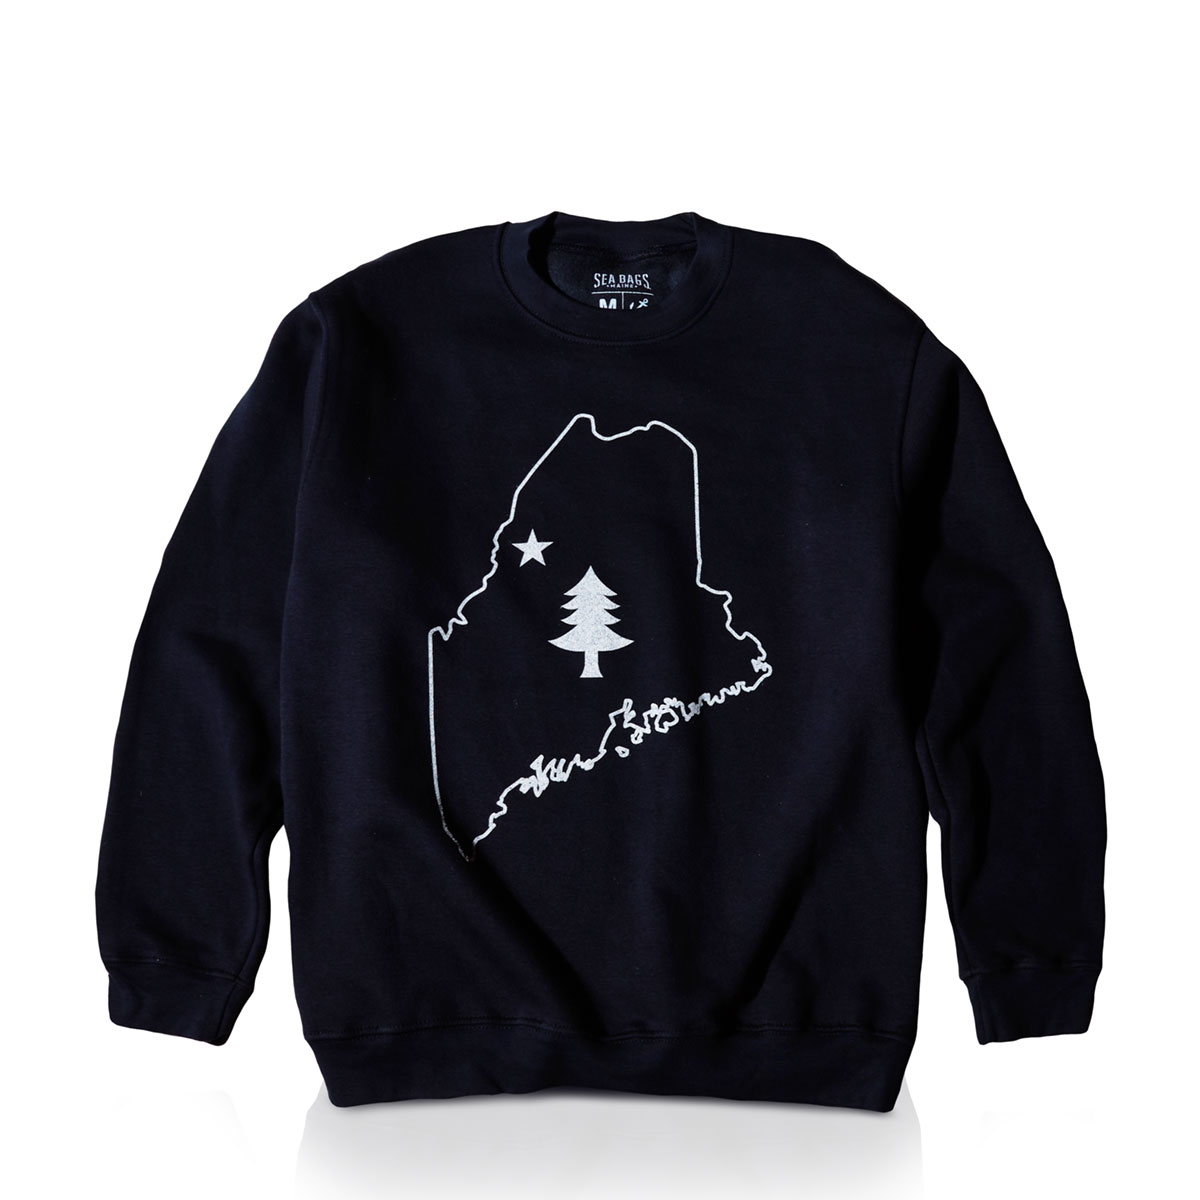 a navy sweatshirt with white state of maine outline with tree and star print on front